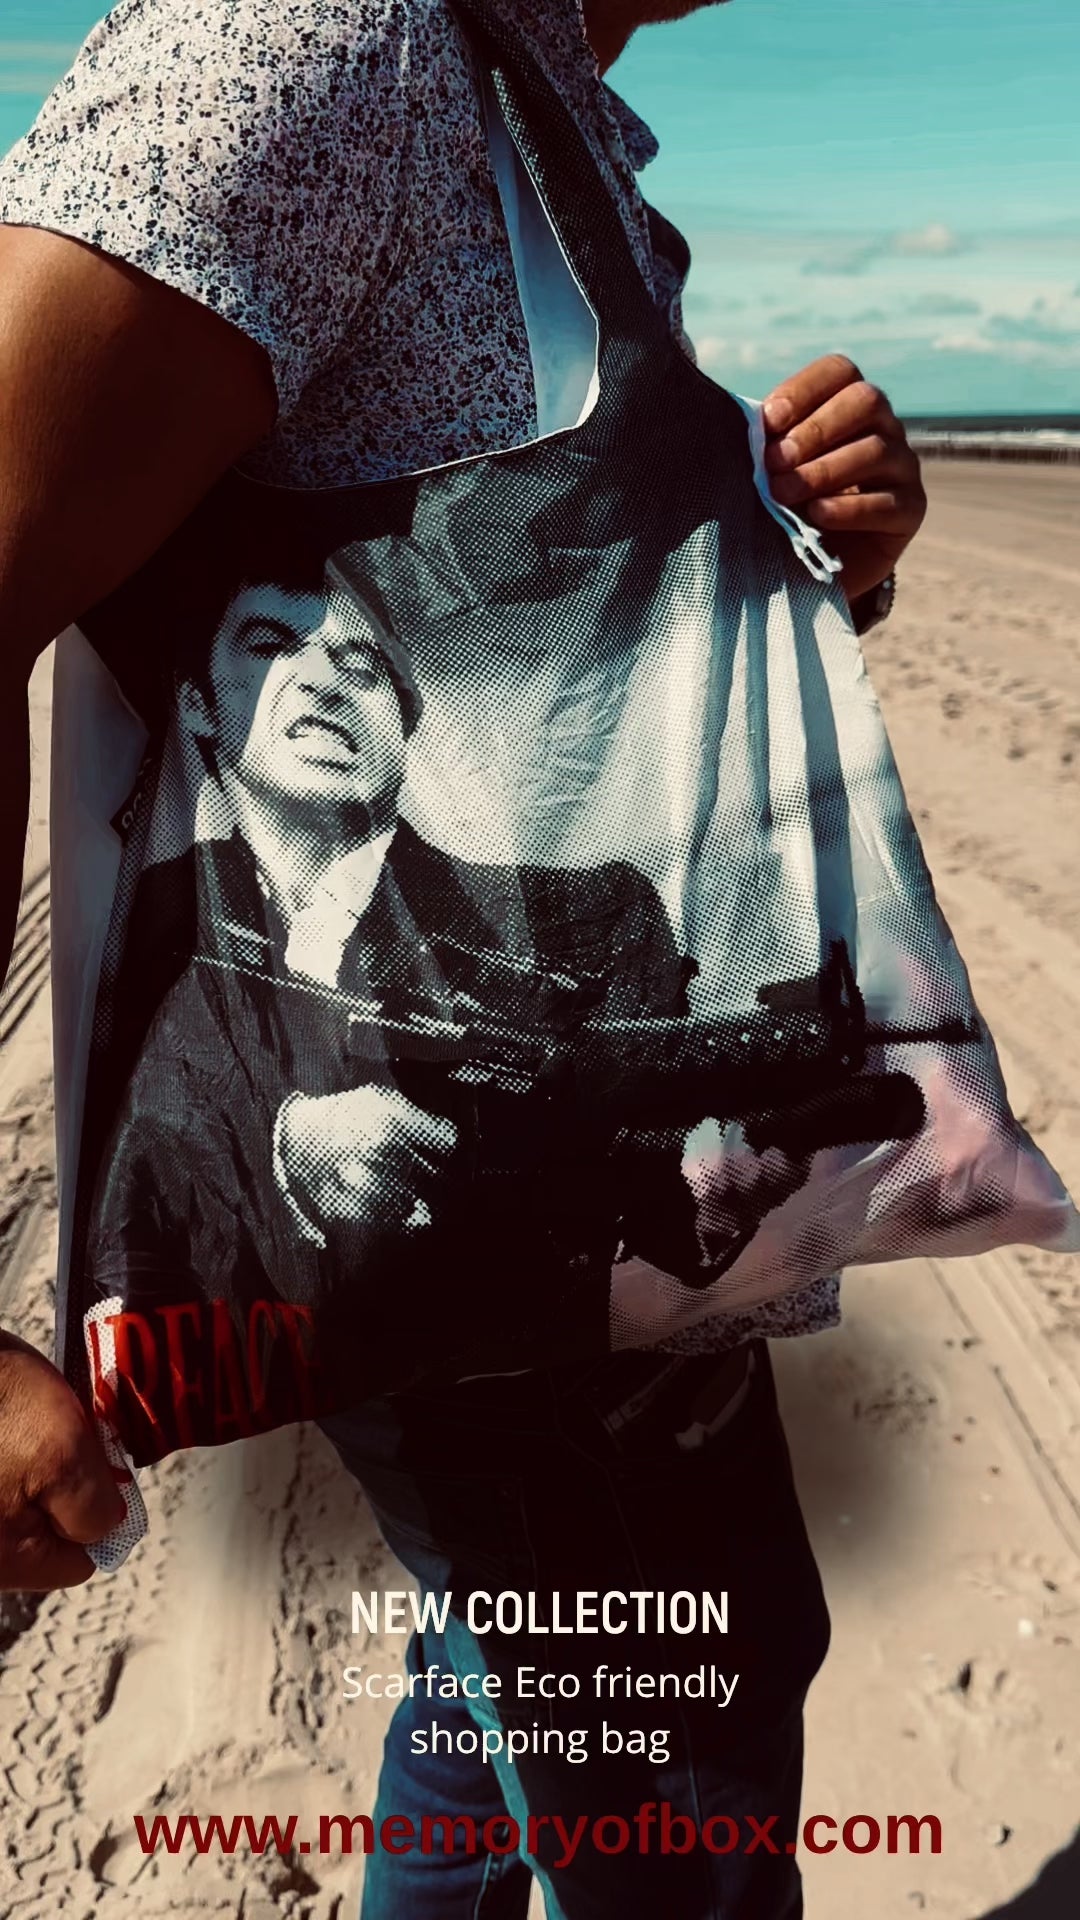 Calling all Scarface, Tony Montana, and Al Pacino fans—shop now to own this exclusive, eco-friendly, reusable shopping bag! This beautiful bag holds up to 20 kilos, making it perfect for groceries, work, school, or outdoor adventures. It also makes a great gift for friends, family, or yourself. With its stylish design, this bag lets you carry the legend with you wherever you go. Don’t miss out—grab yours today!